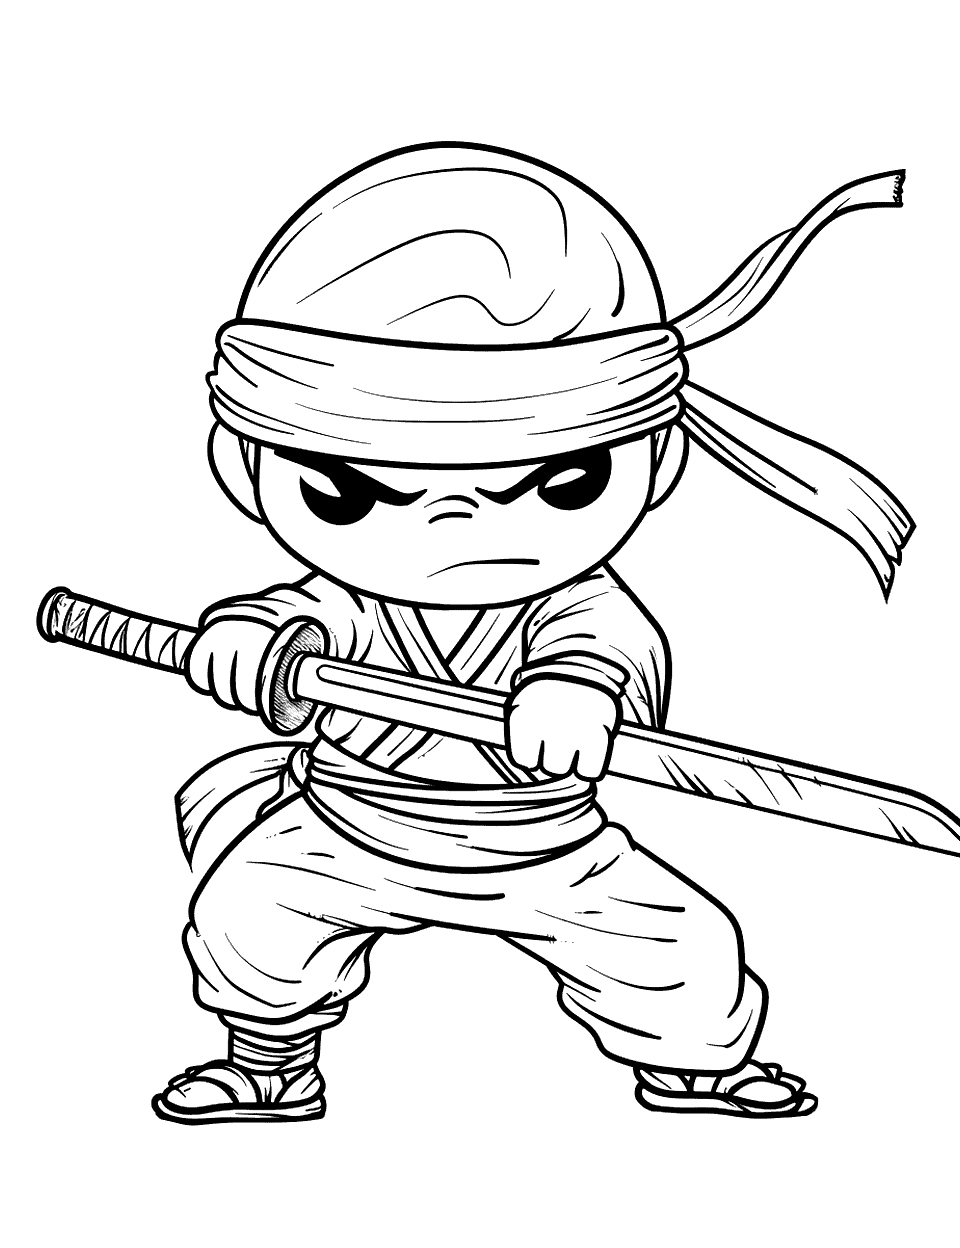 Boy Ninja Training Coloring Page - A young boy dressed as a ninja, practicing with a wooden sword.